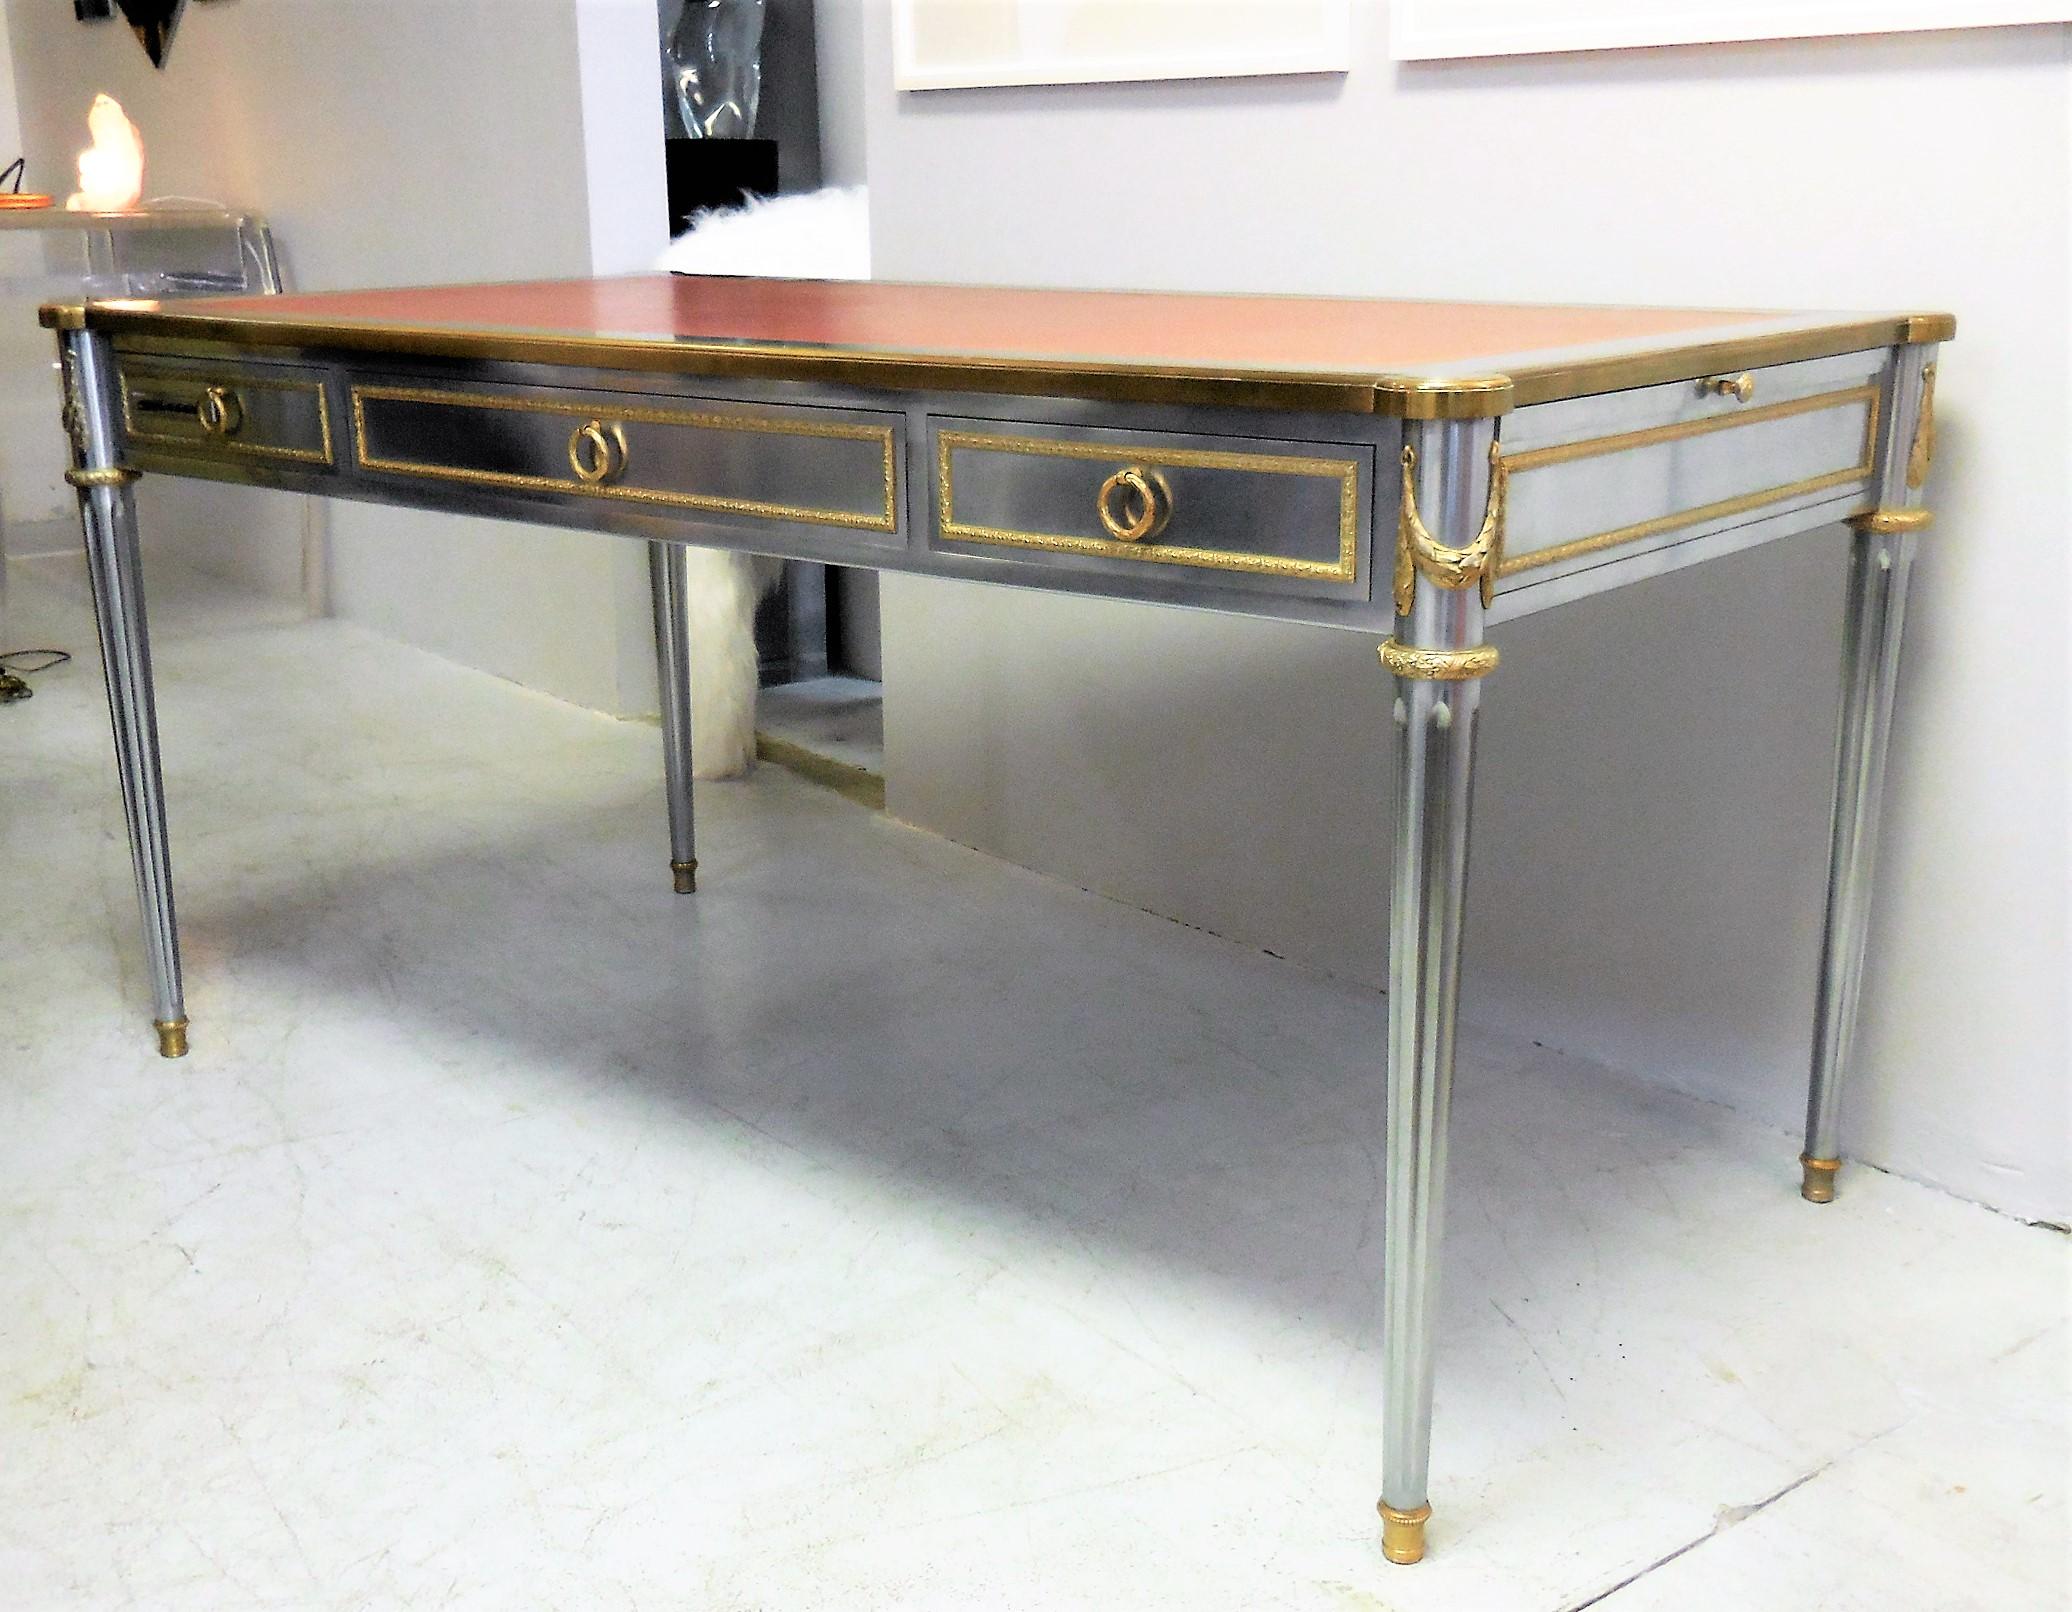 John Vesey V-60 Stainless Steel Bronze and Red Leather Desk, 1960s For Sale 9